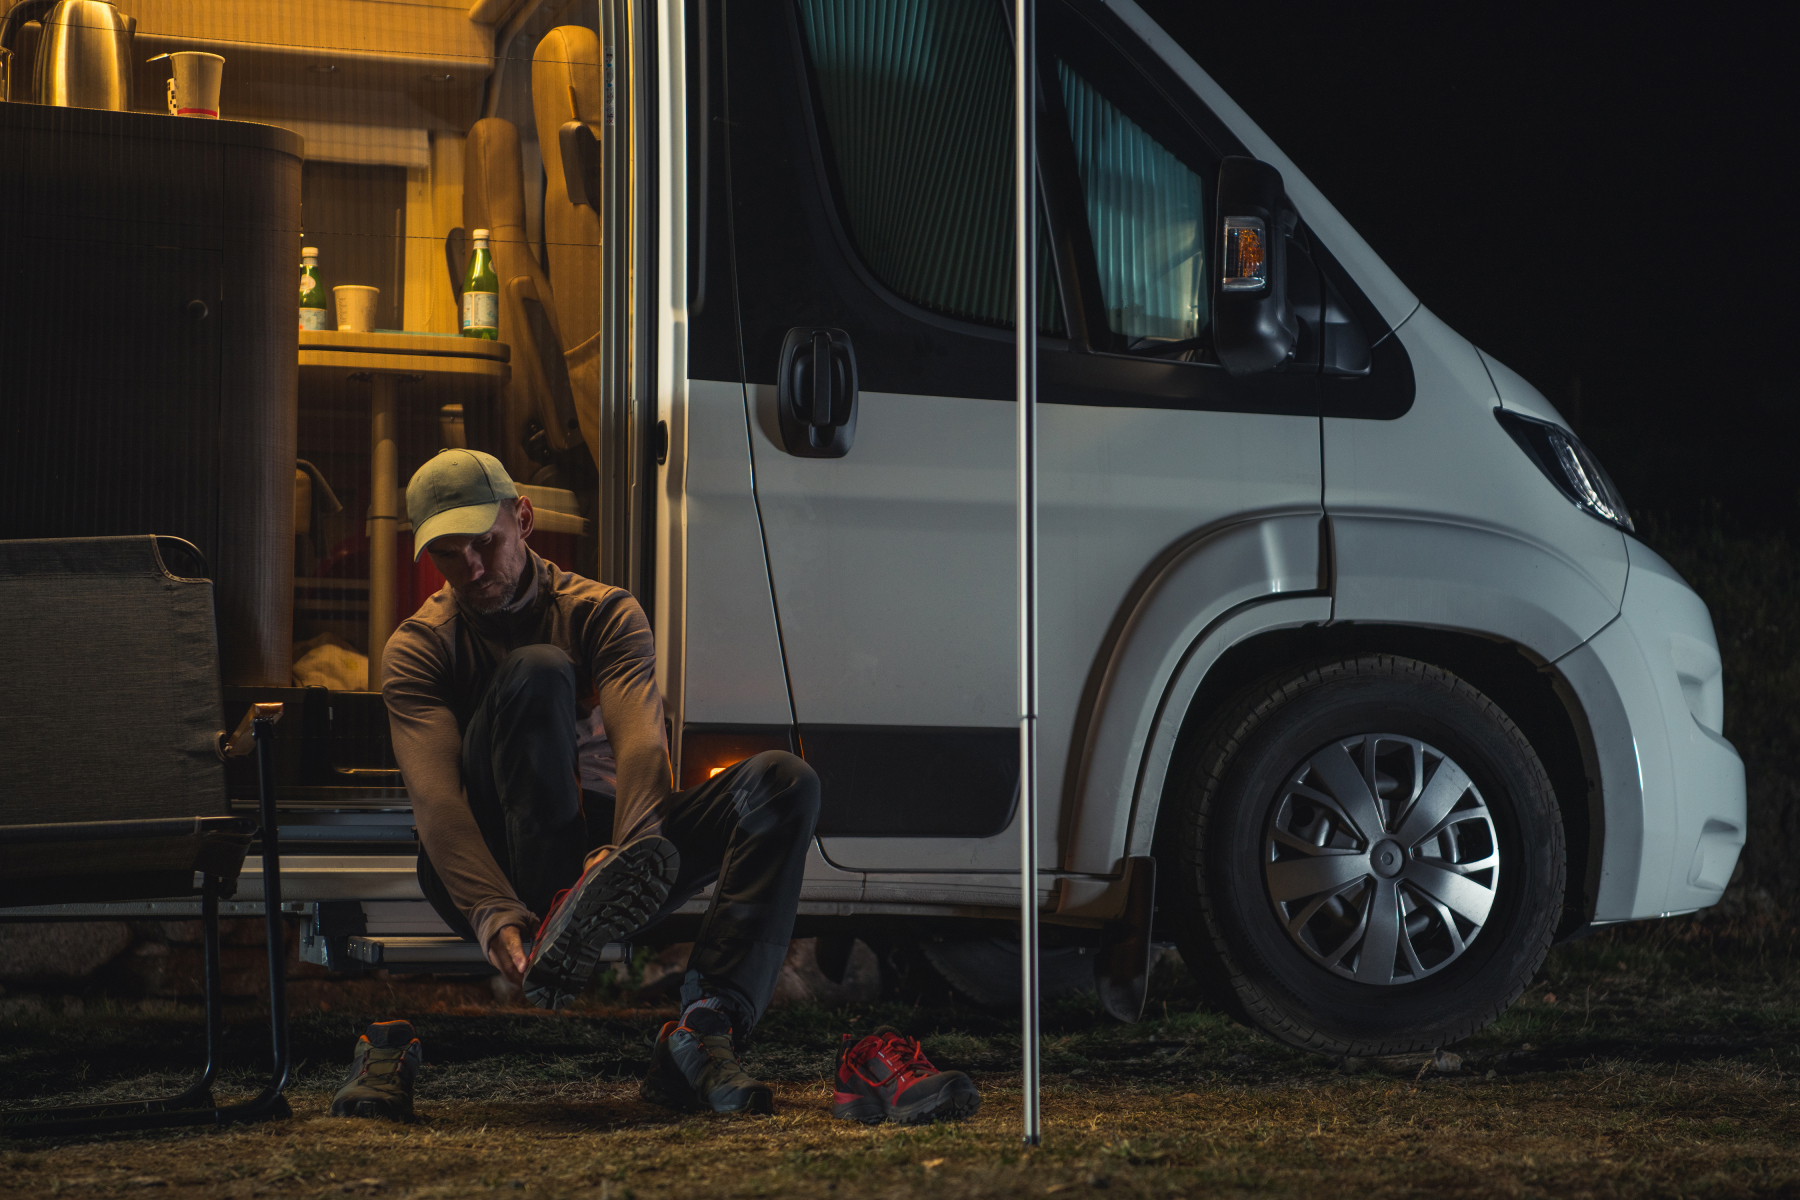 55467420 Hiker Changing Shoes In Front Of His Camper Van